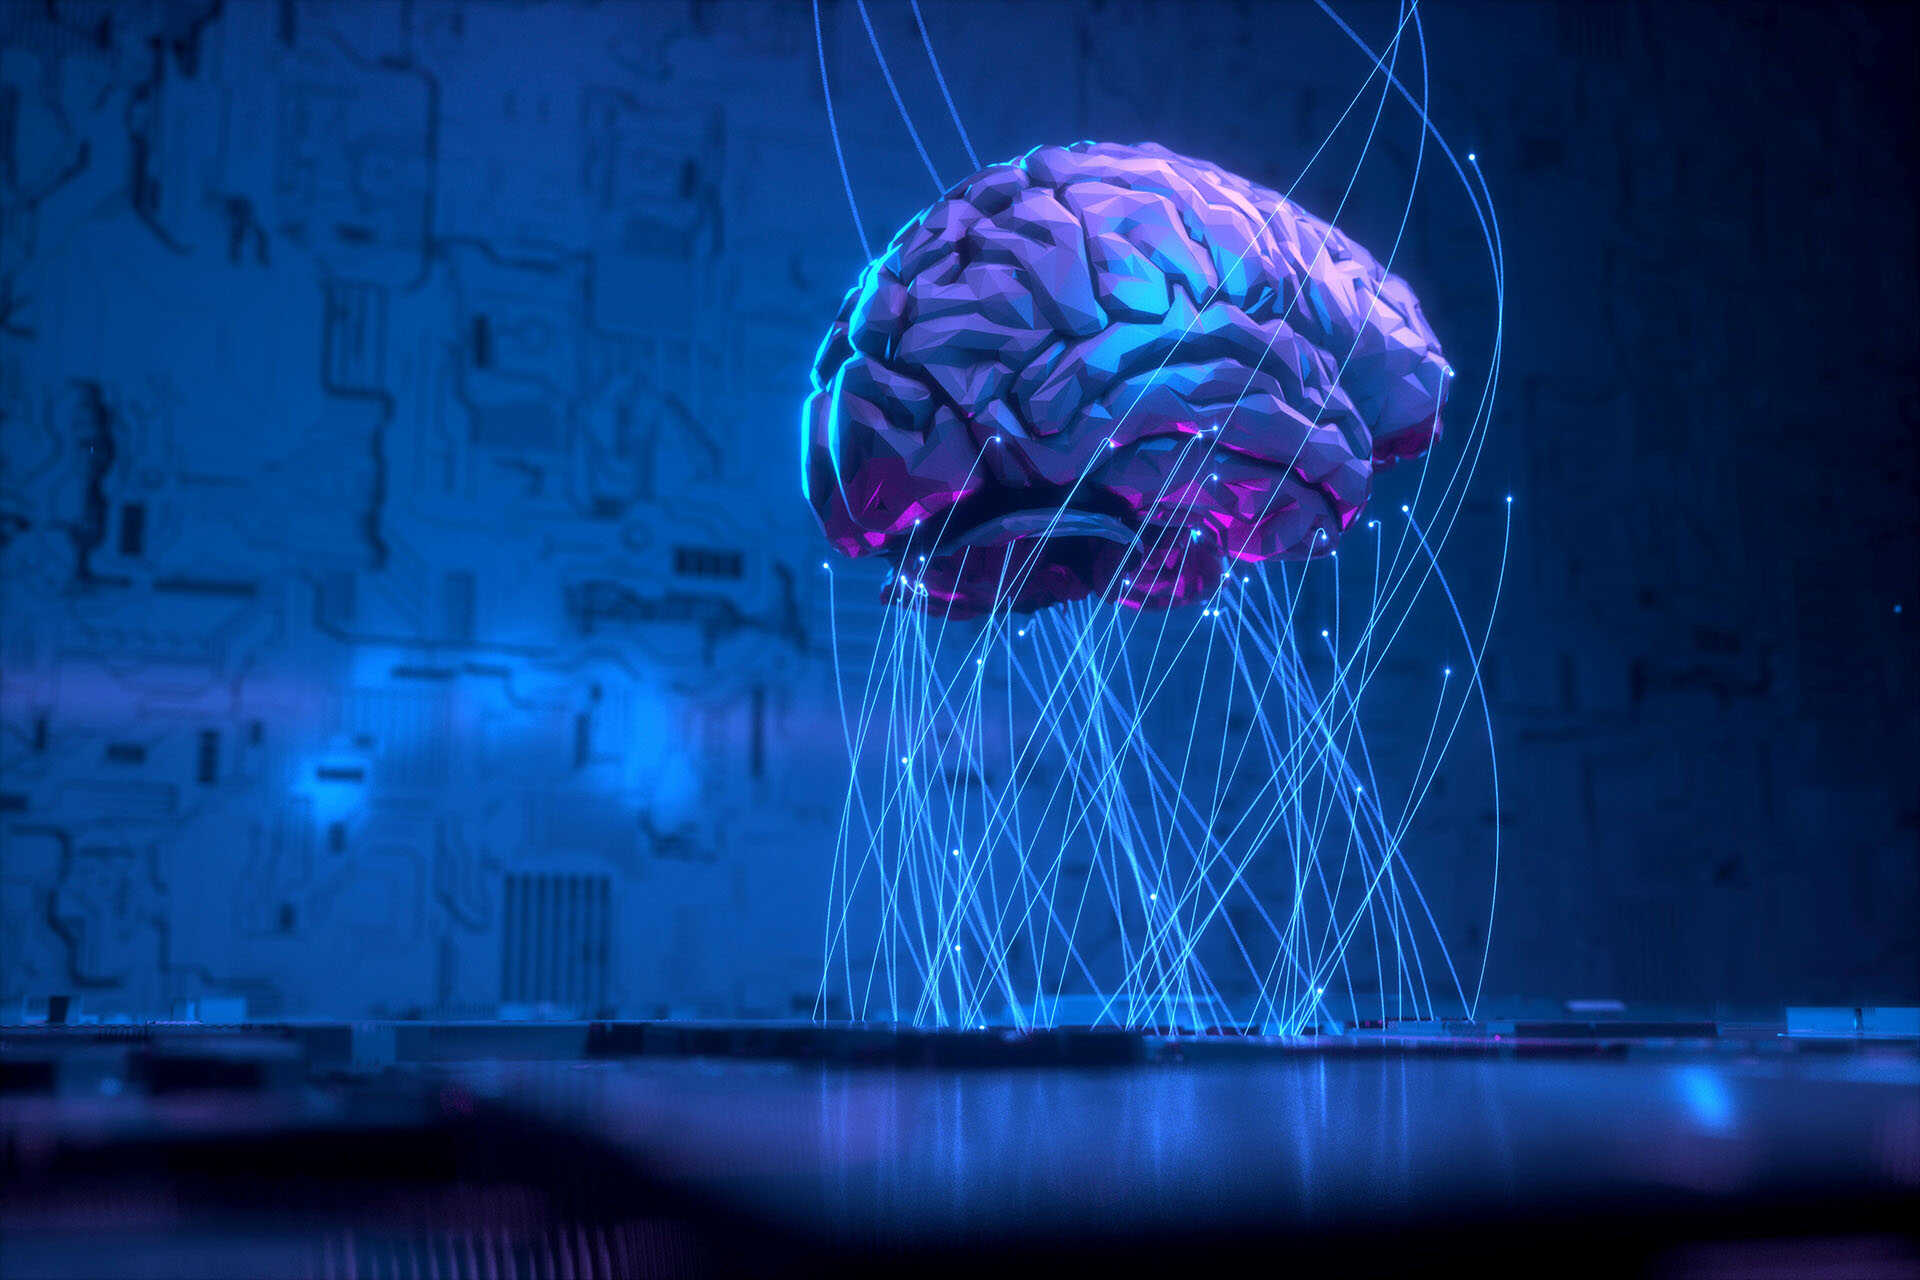 Colourful holographic image of the human brain